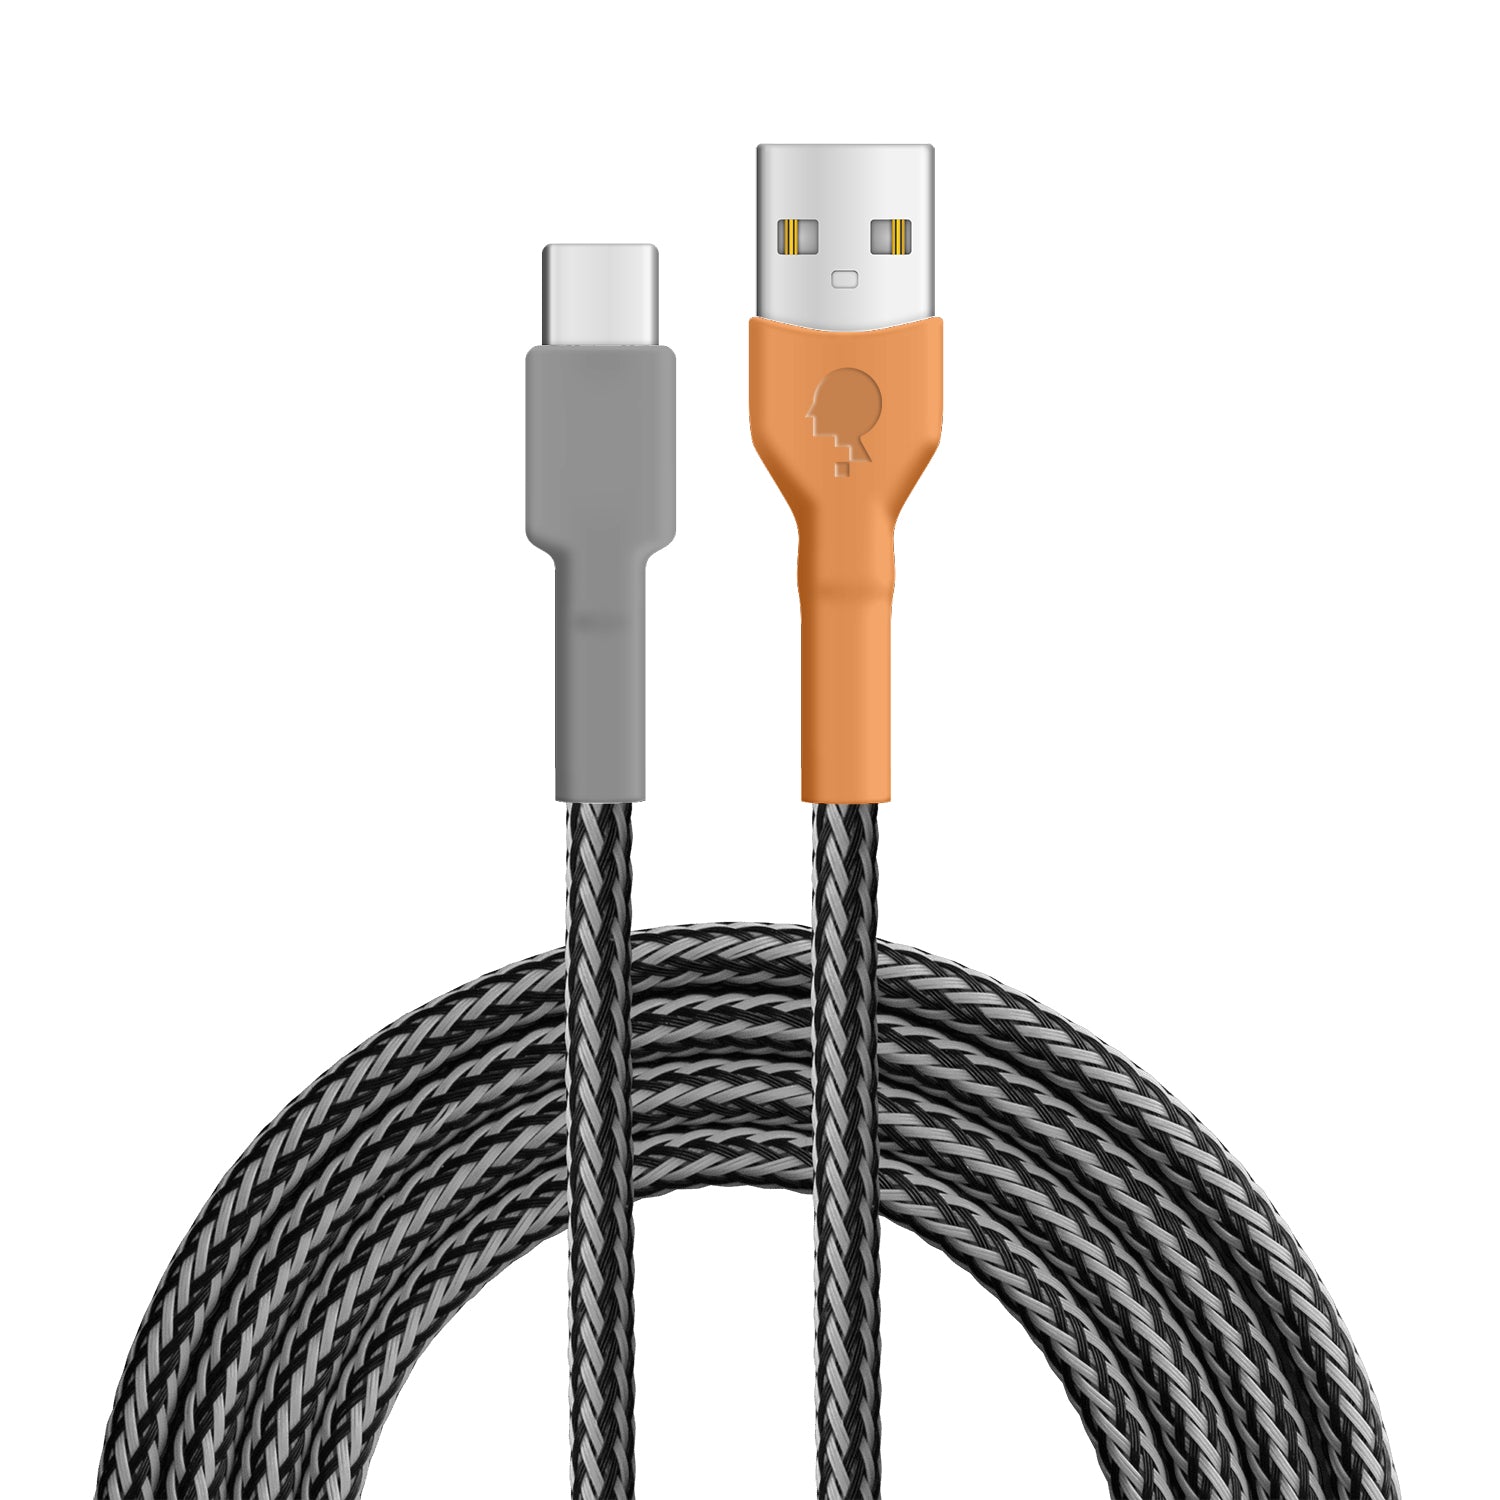 Sustainable USB charging cable